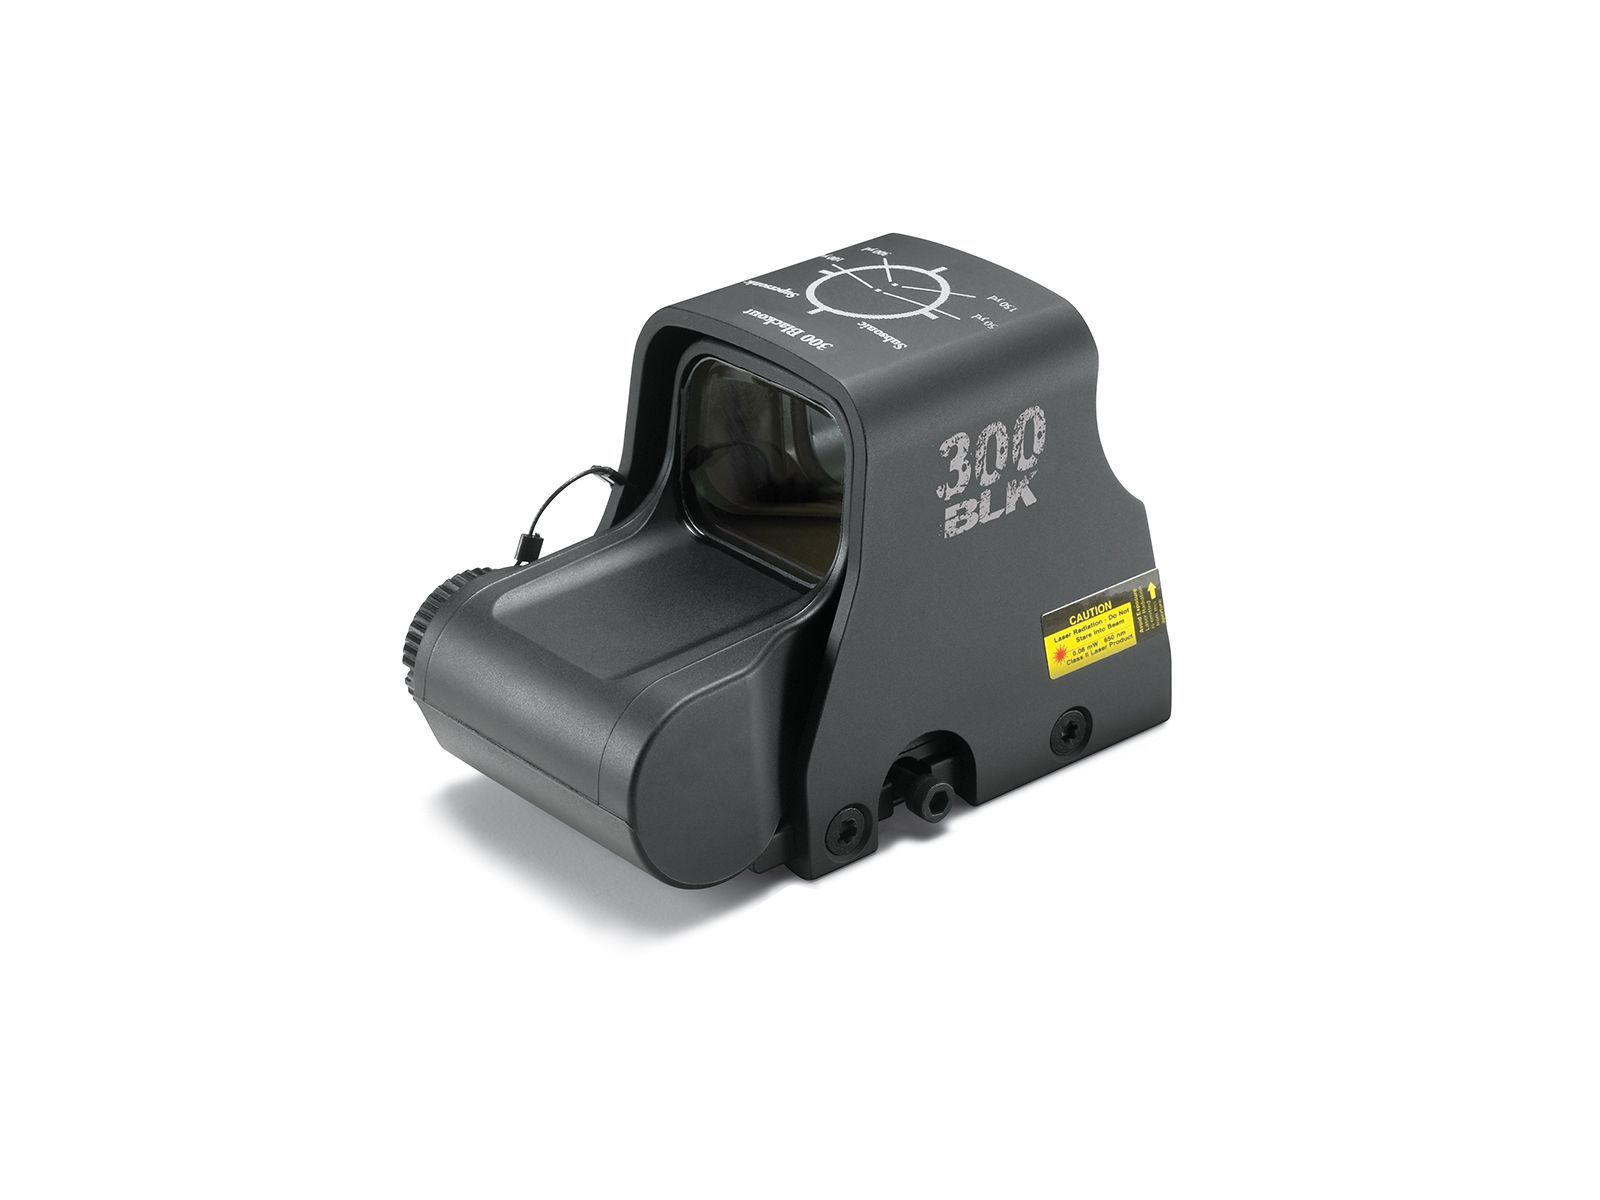 Holographic sight EOTech XPS 2-300 - for .300 AAC Blackout